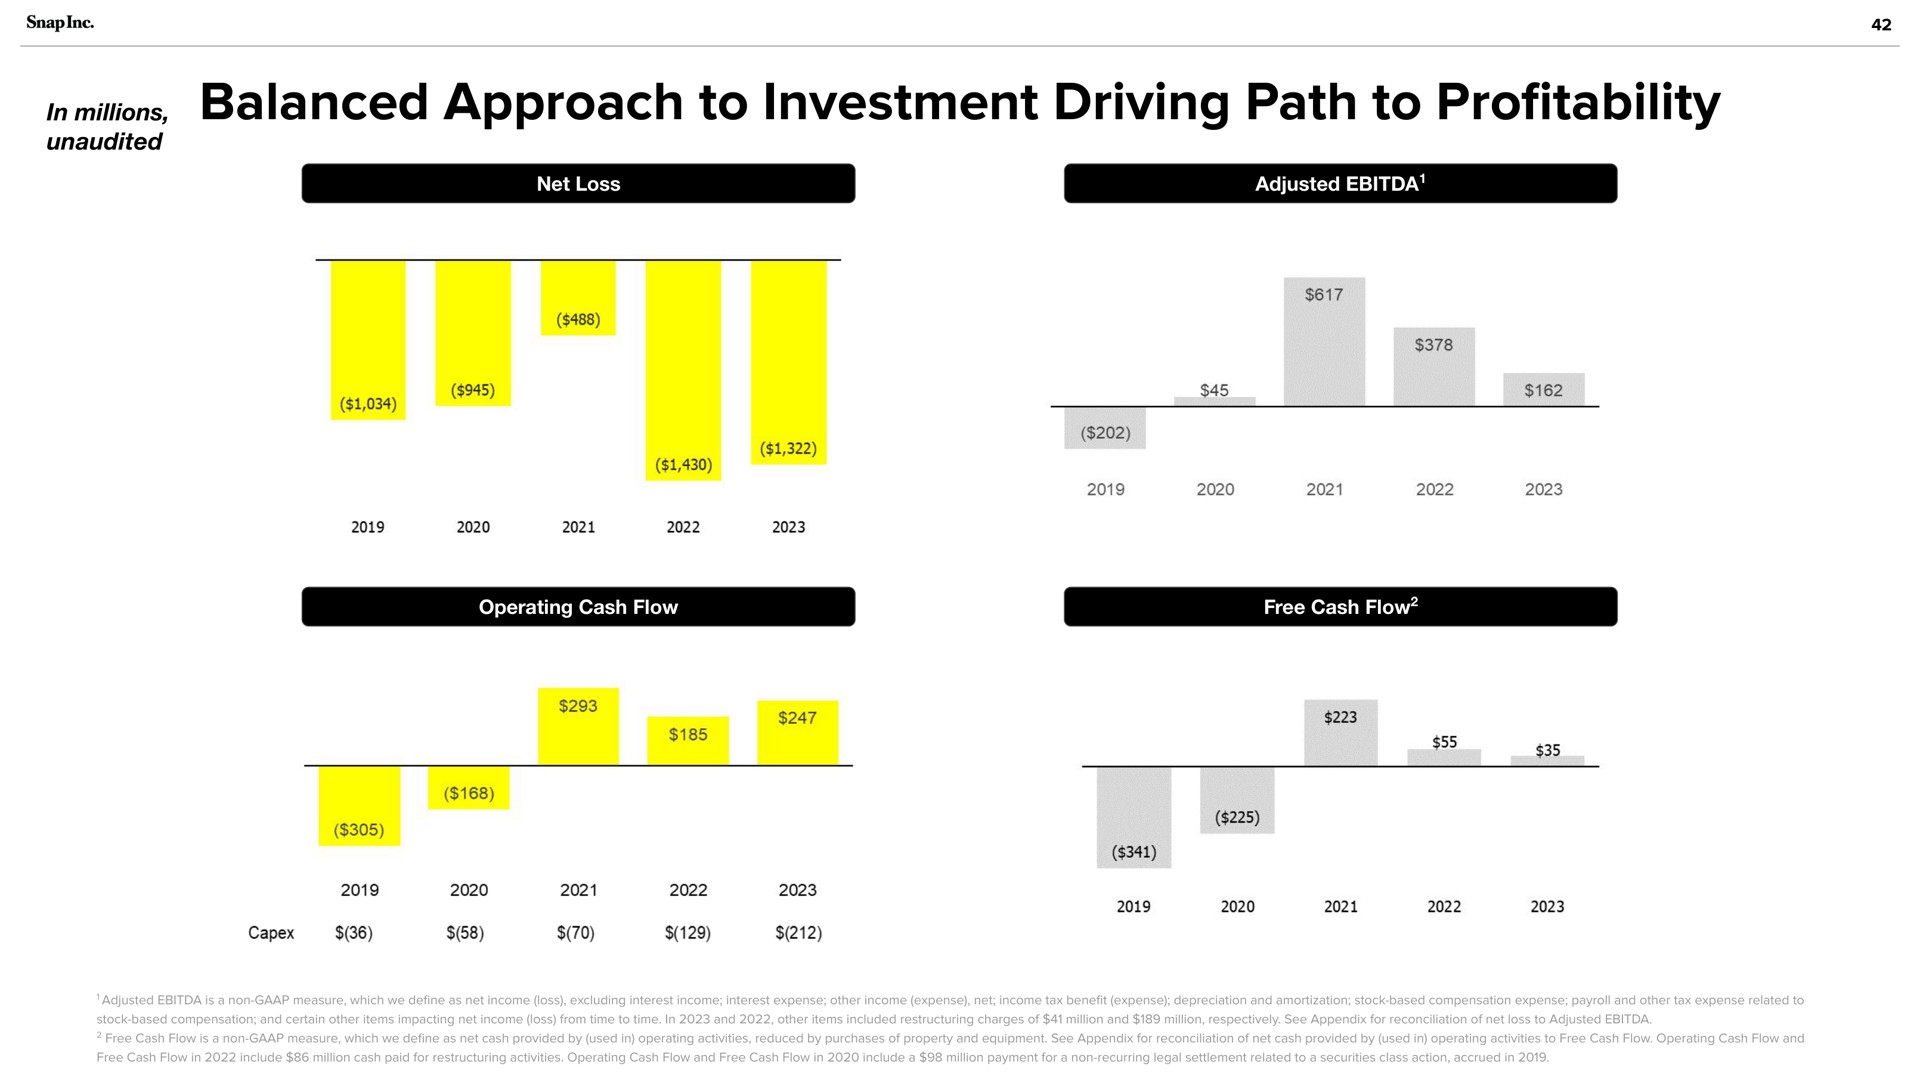 balanced approach to investment driving path to pro profitability | Snap Inc